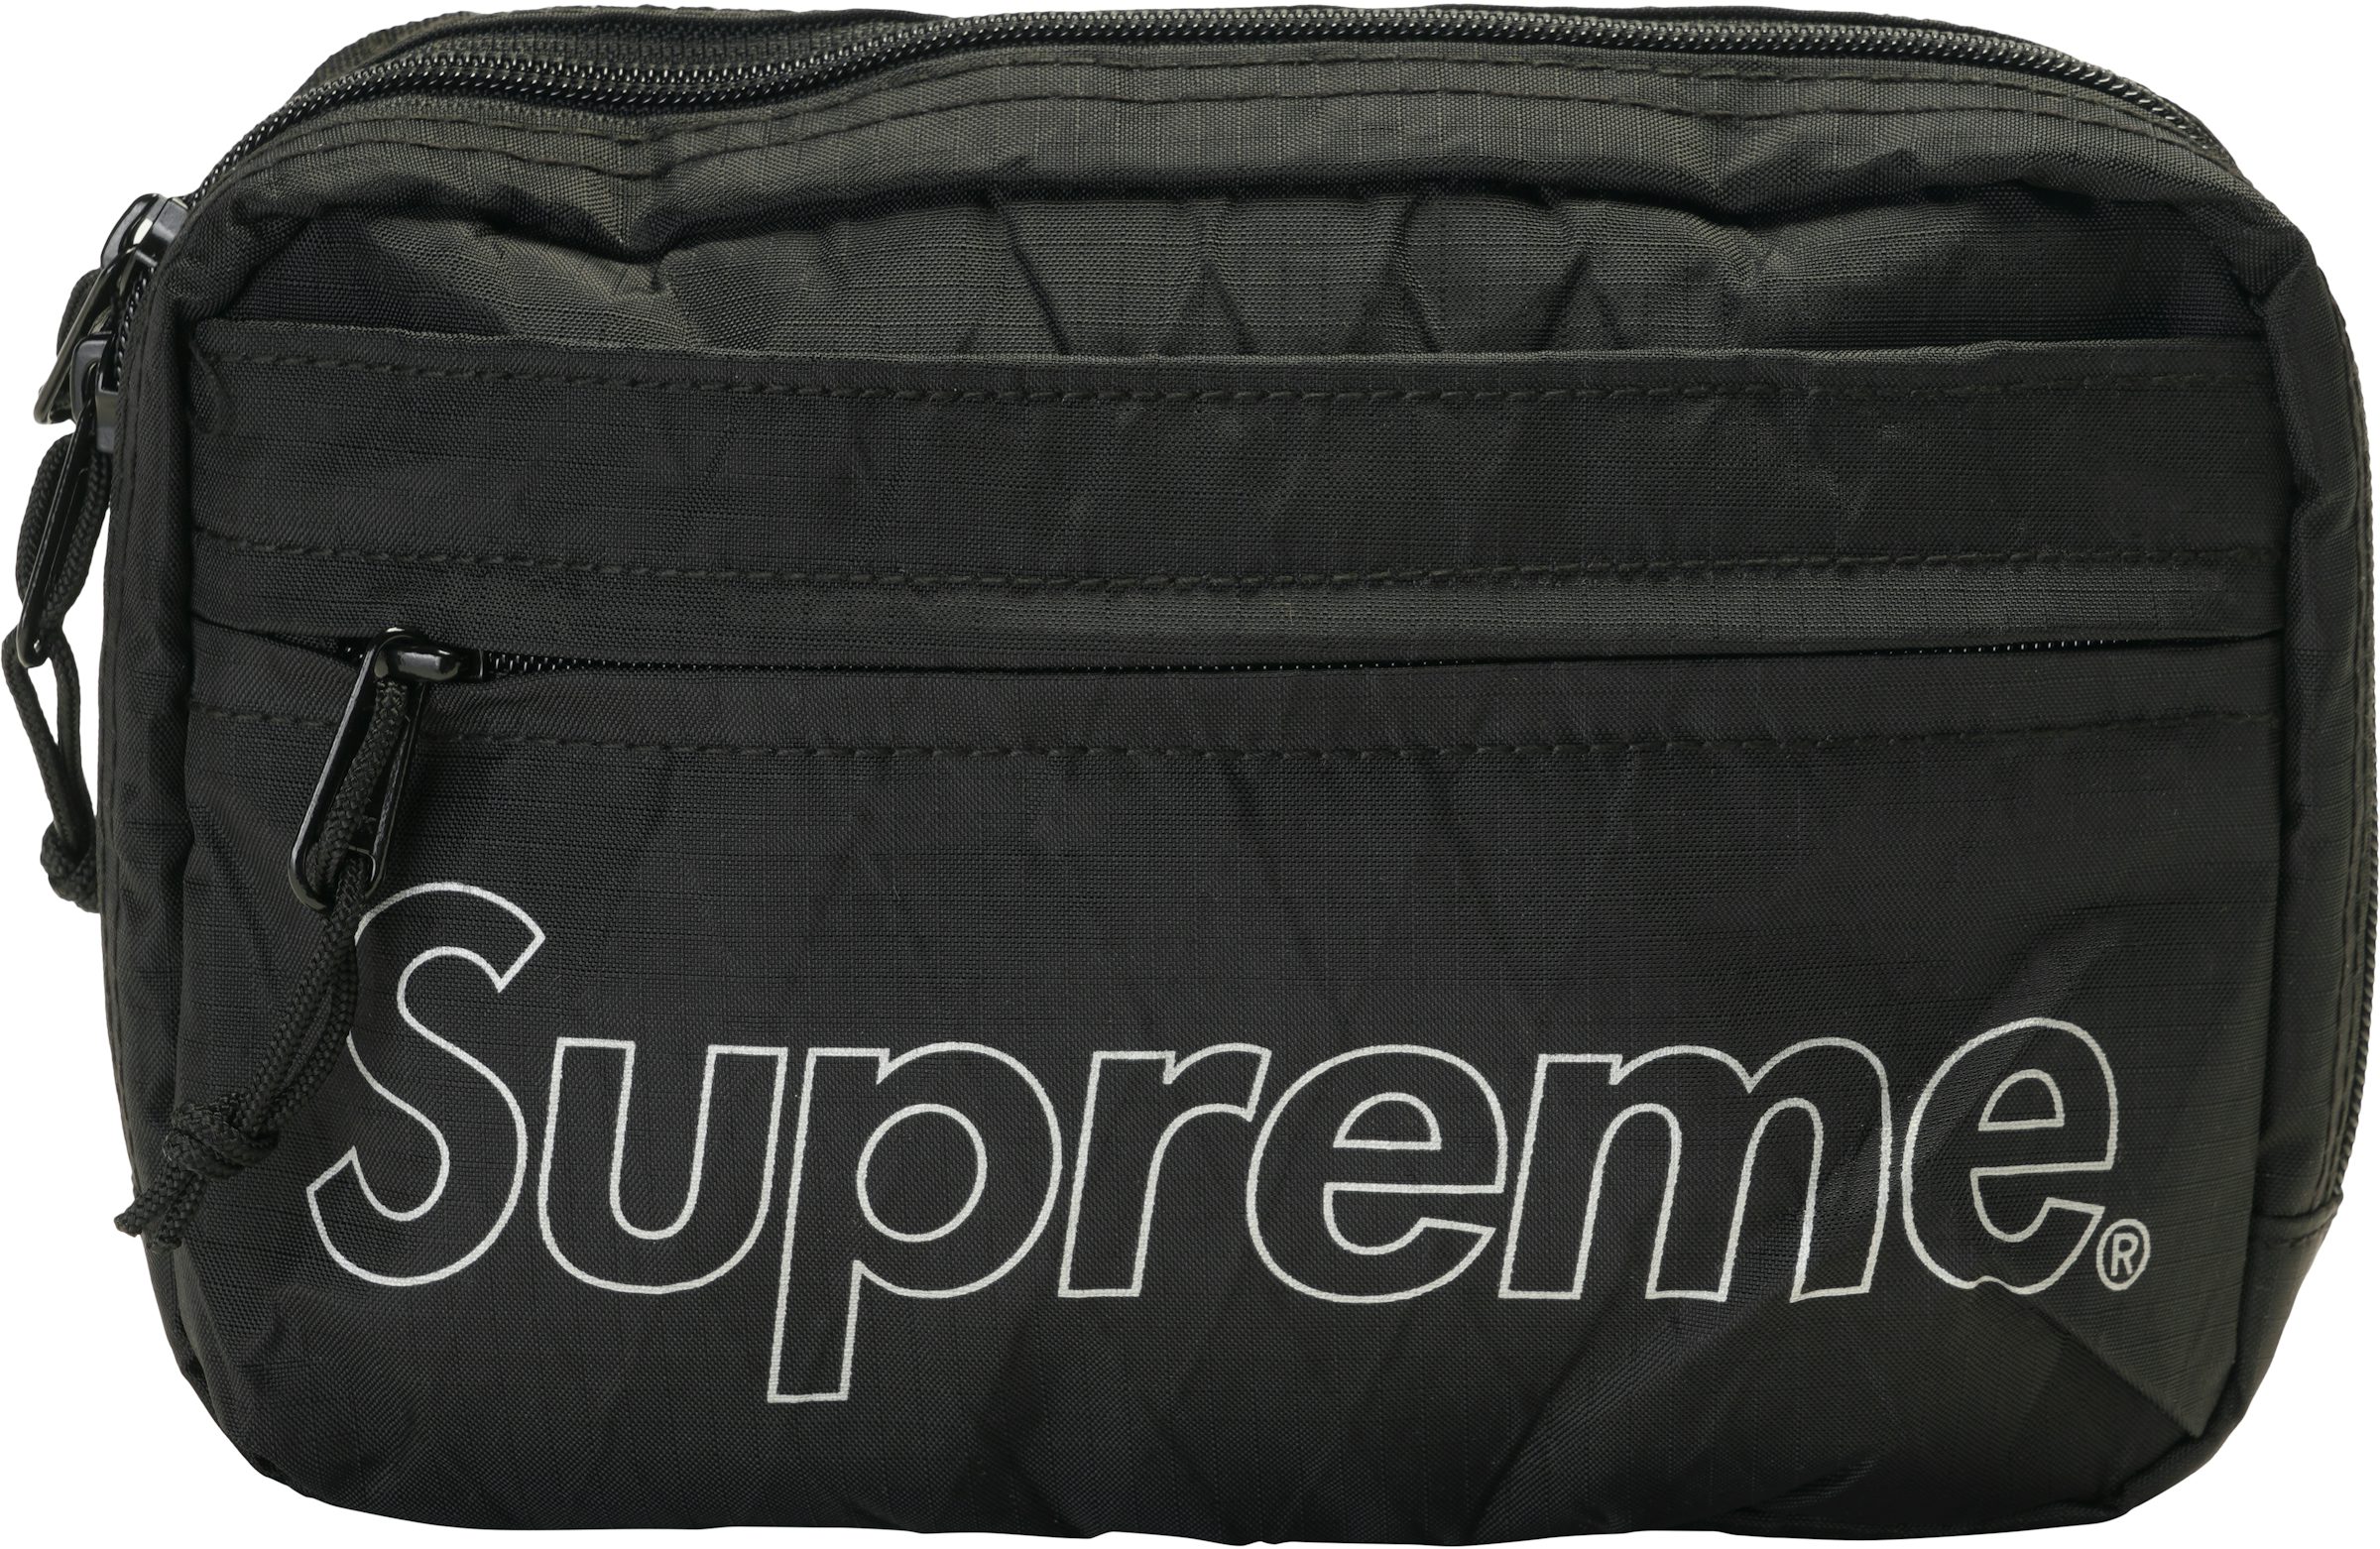 Supreme New York Red Shoulder Bag FW 18 Week 1 NWT Authentic